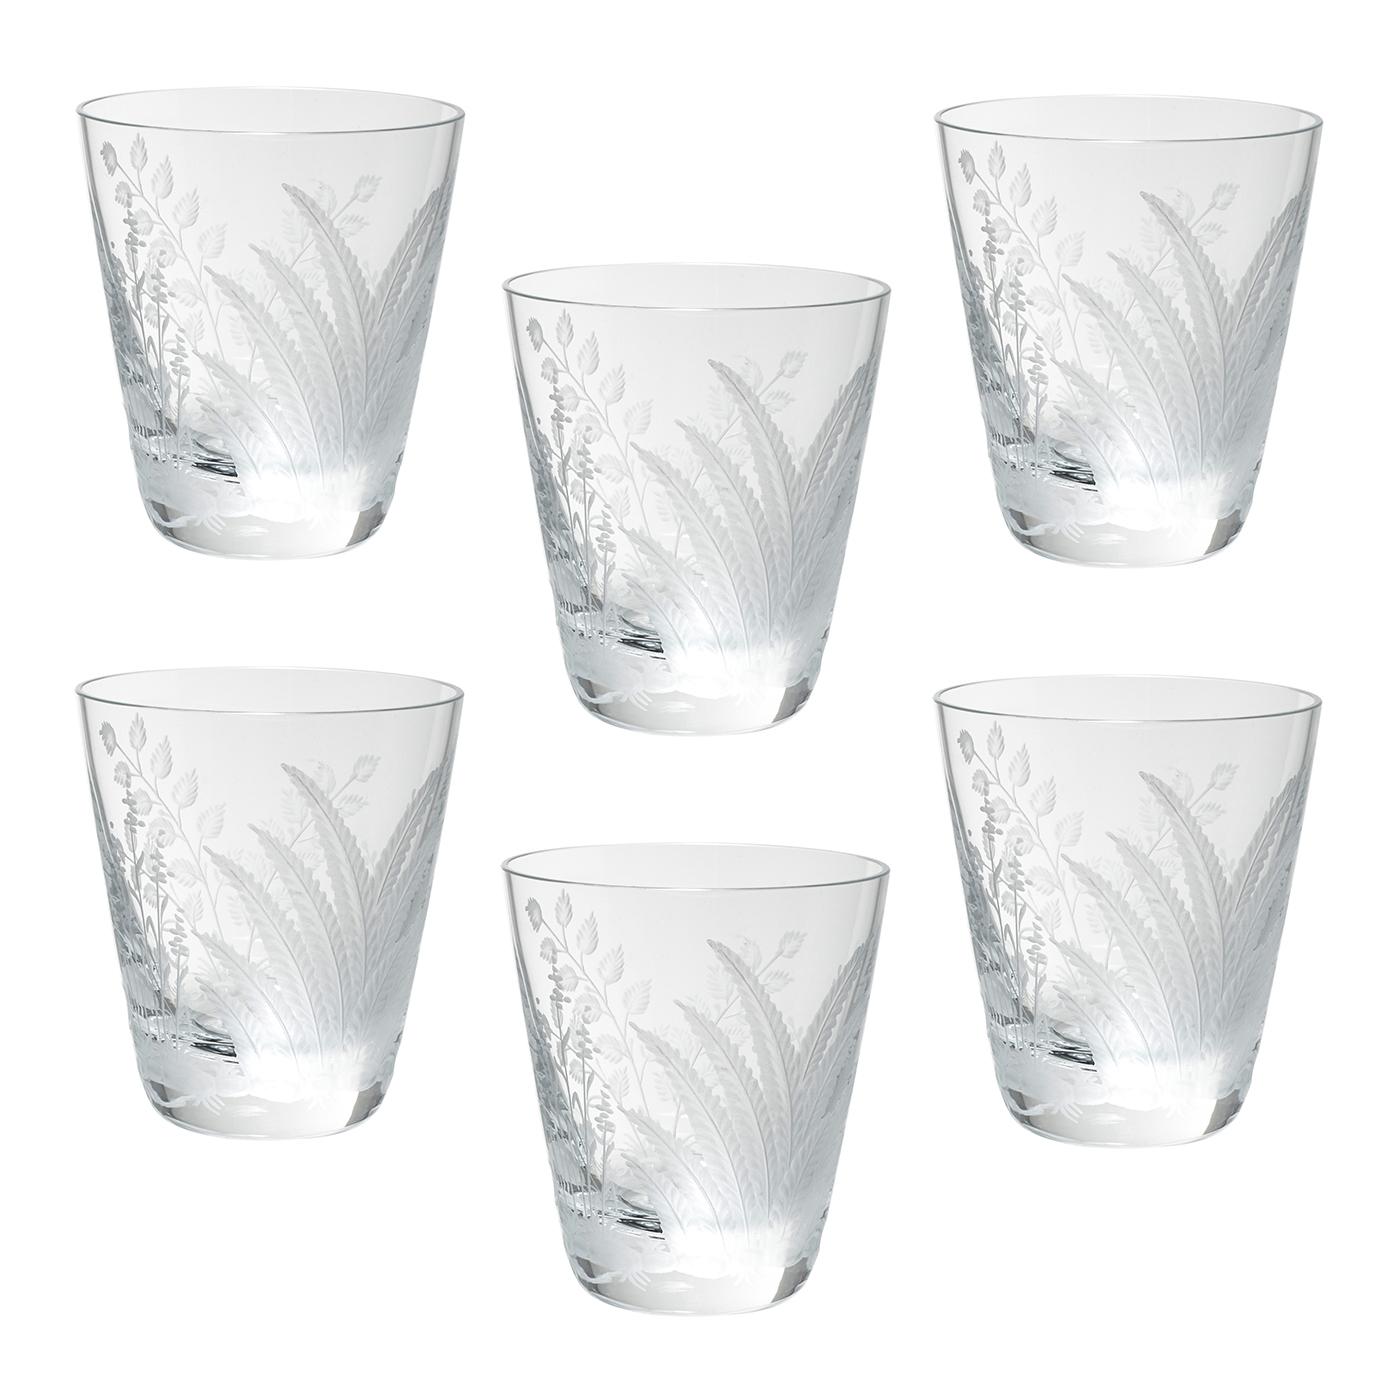 Set of six hand blown tumbler in clear crystal with a hand-edged country style fern decor. The decor shows a hand-engraved decor with fern leaves all-over the glass. Handmade in Bavaria/Germany. Can be ordered also in amber or green. A matching